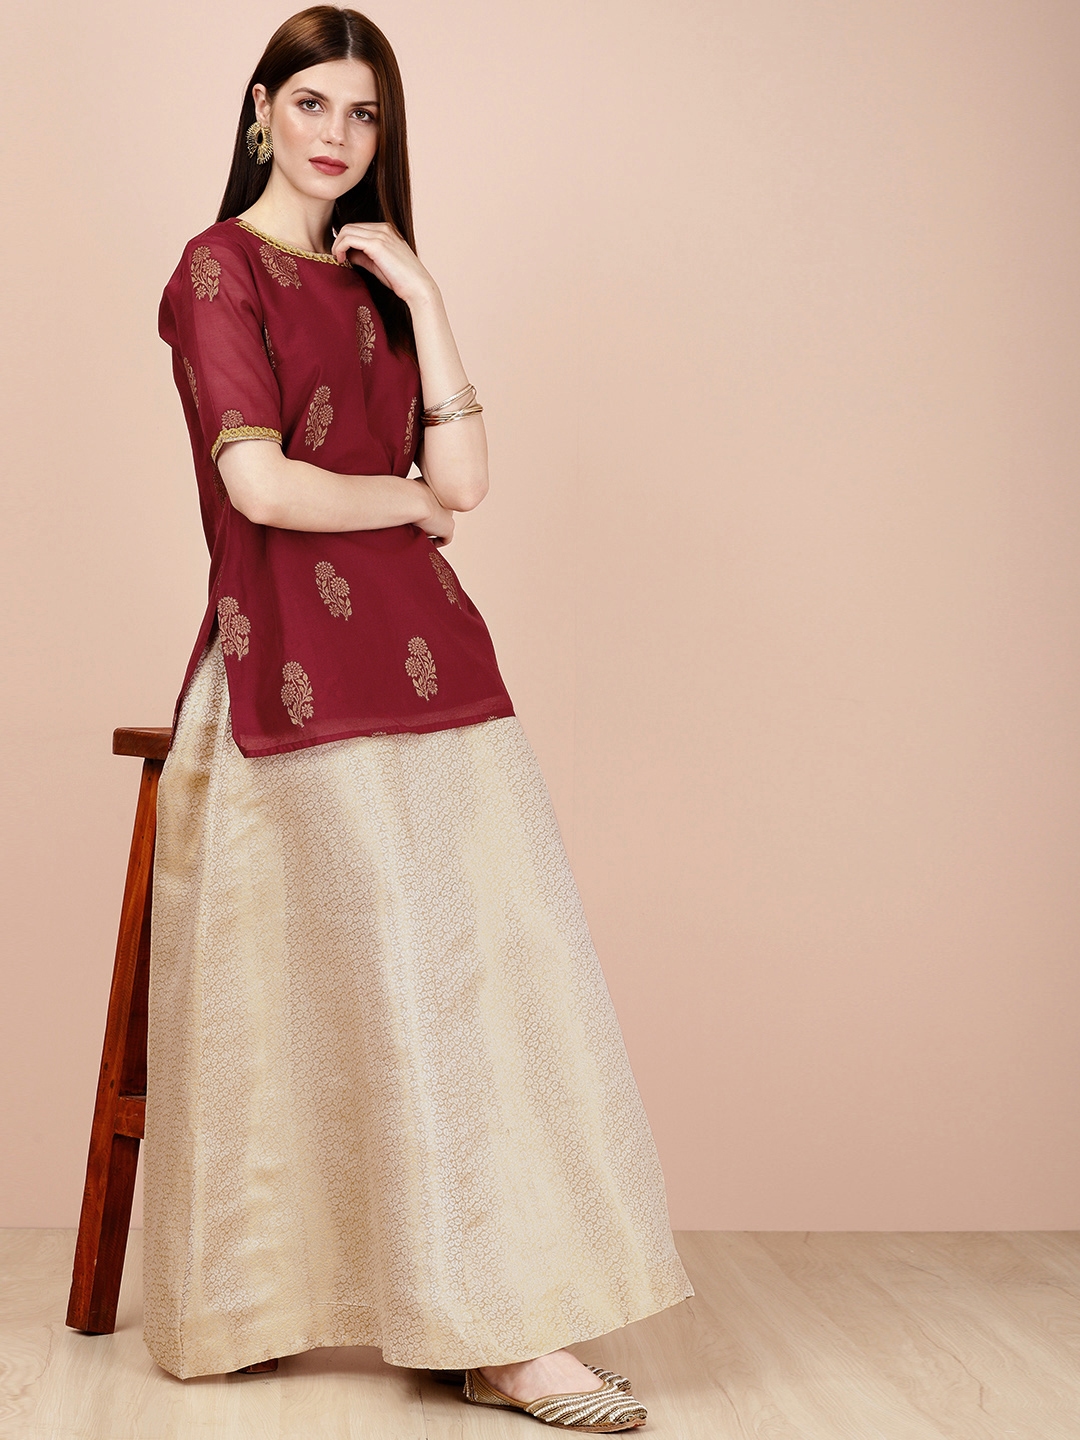 Have You Tried Wearing Your Kurtis with a Skirt Heres Why You Should Plus  10 Trendy Combos of Kurtis on Skirts to Buy Online 2019